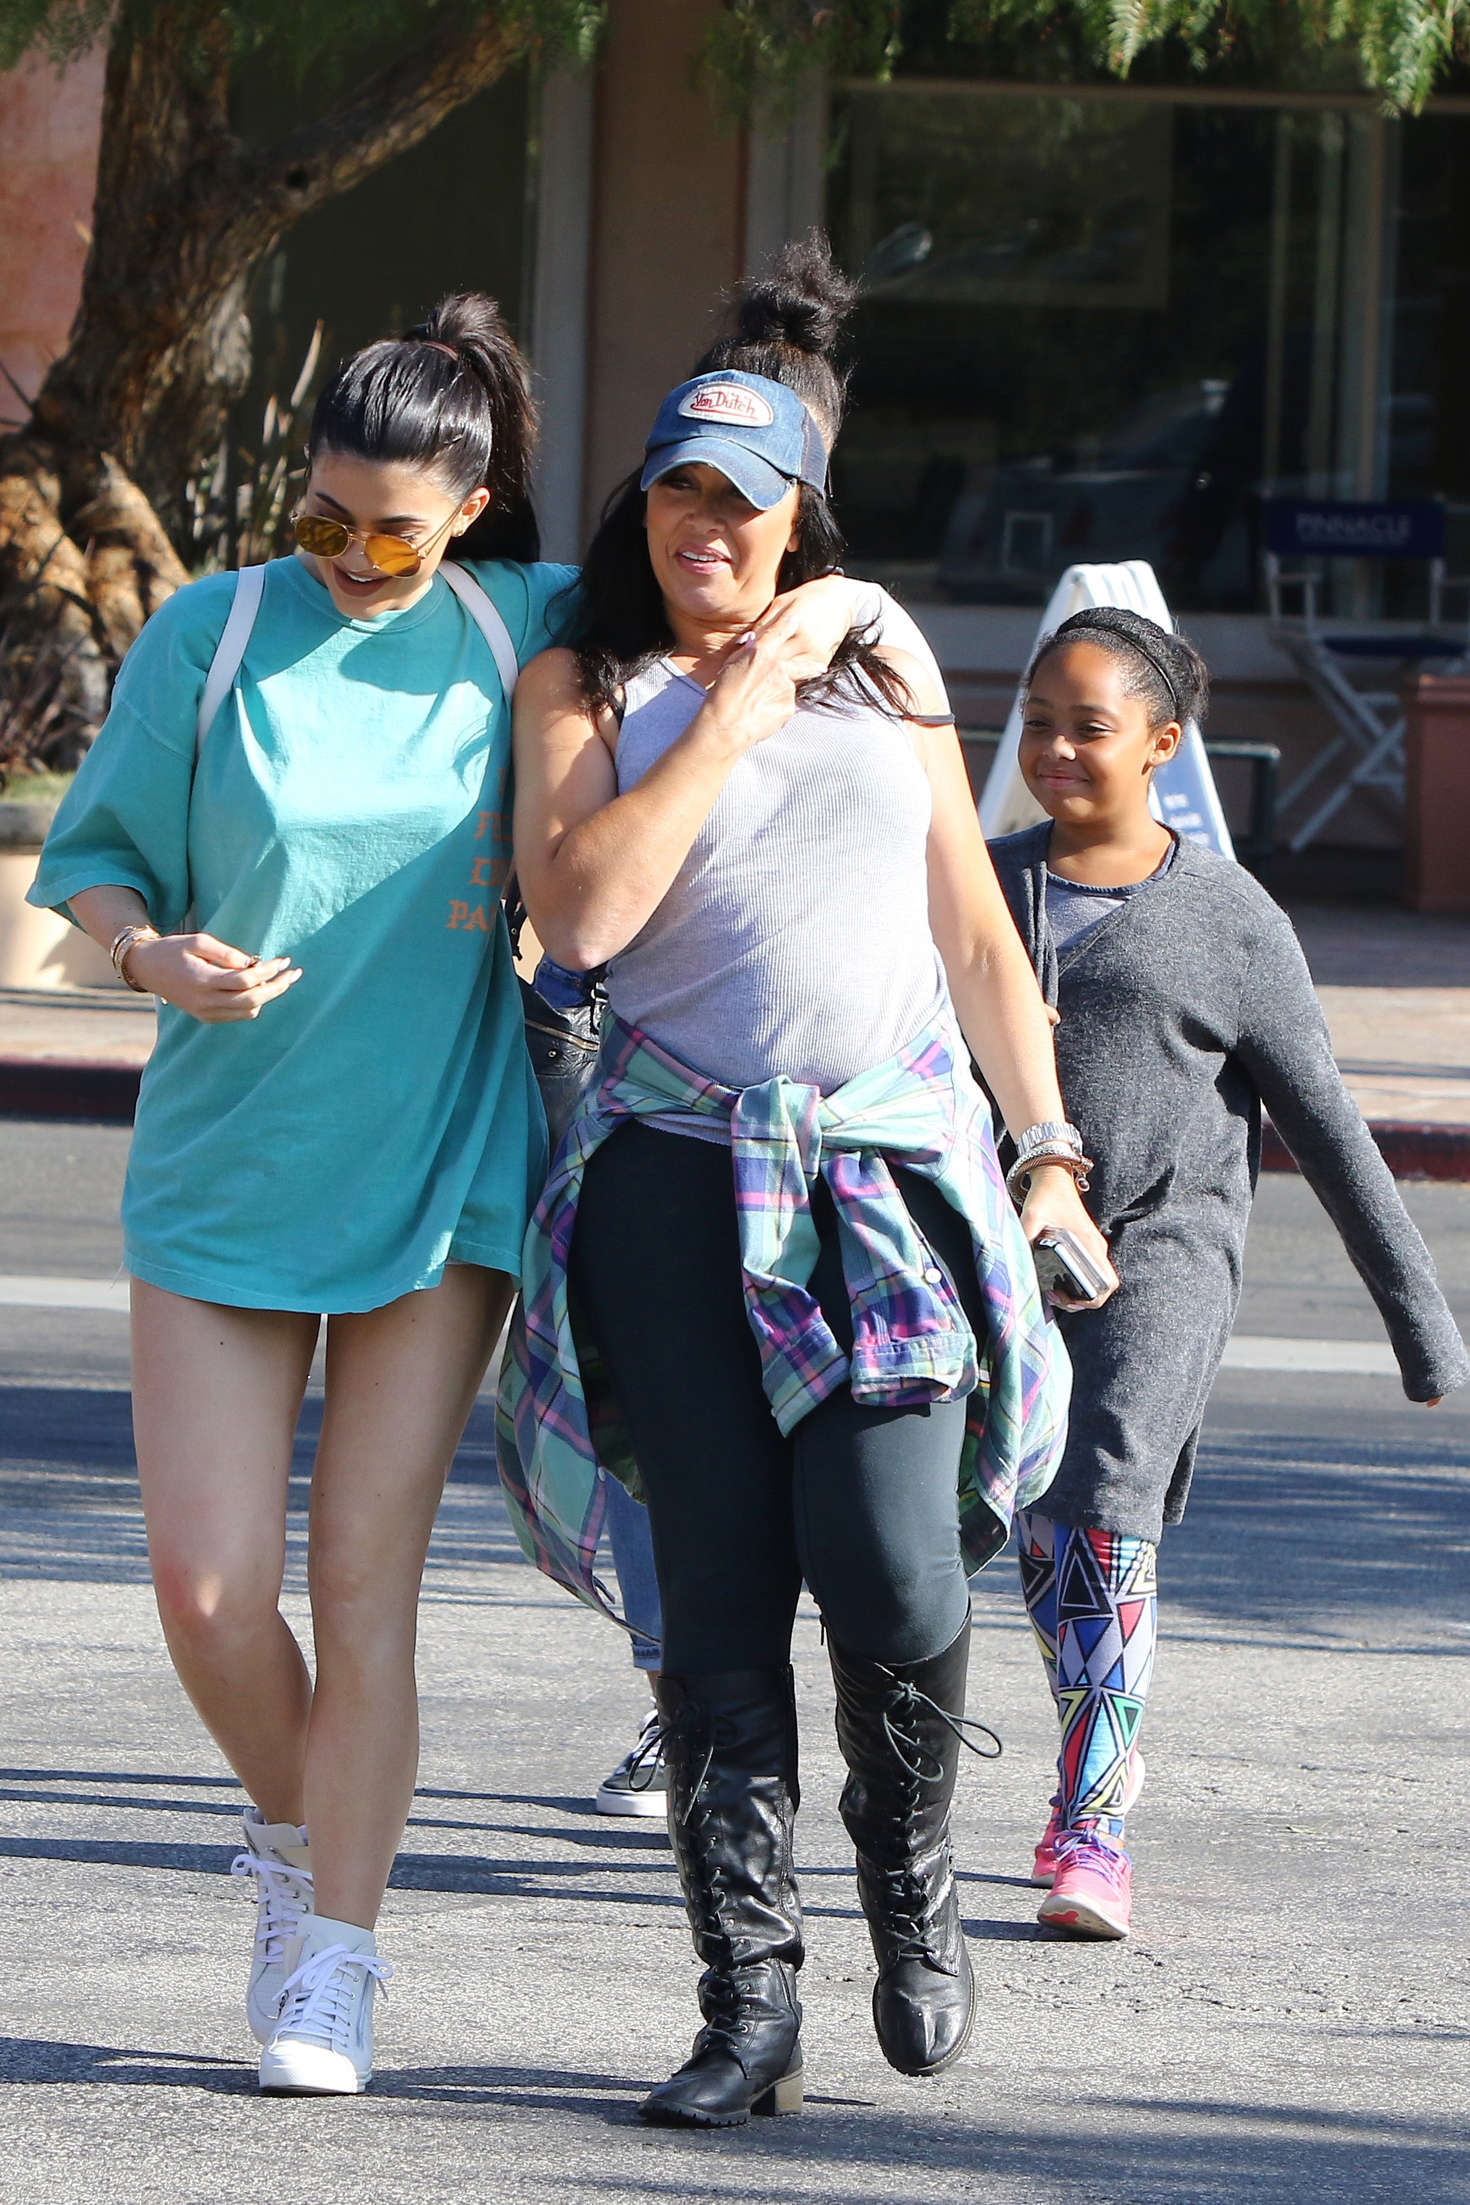 Kylie Jenner in Jeans Shorts at Bui Sushi in Malibu